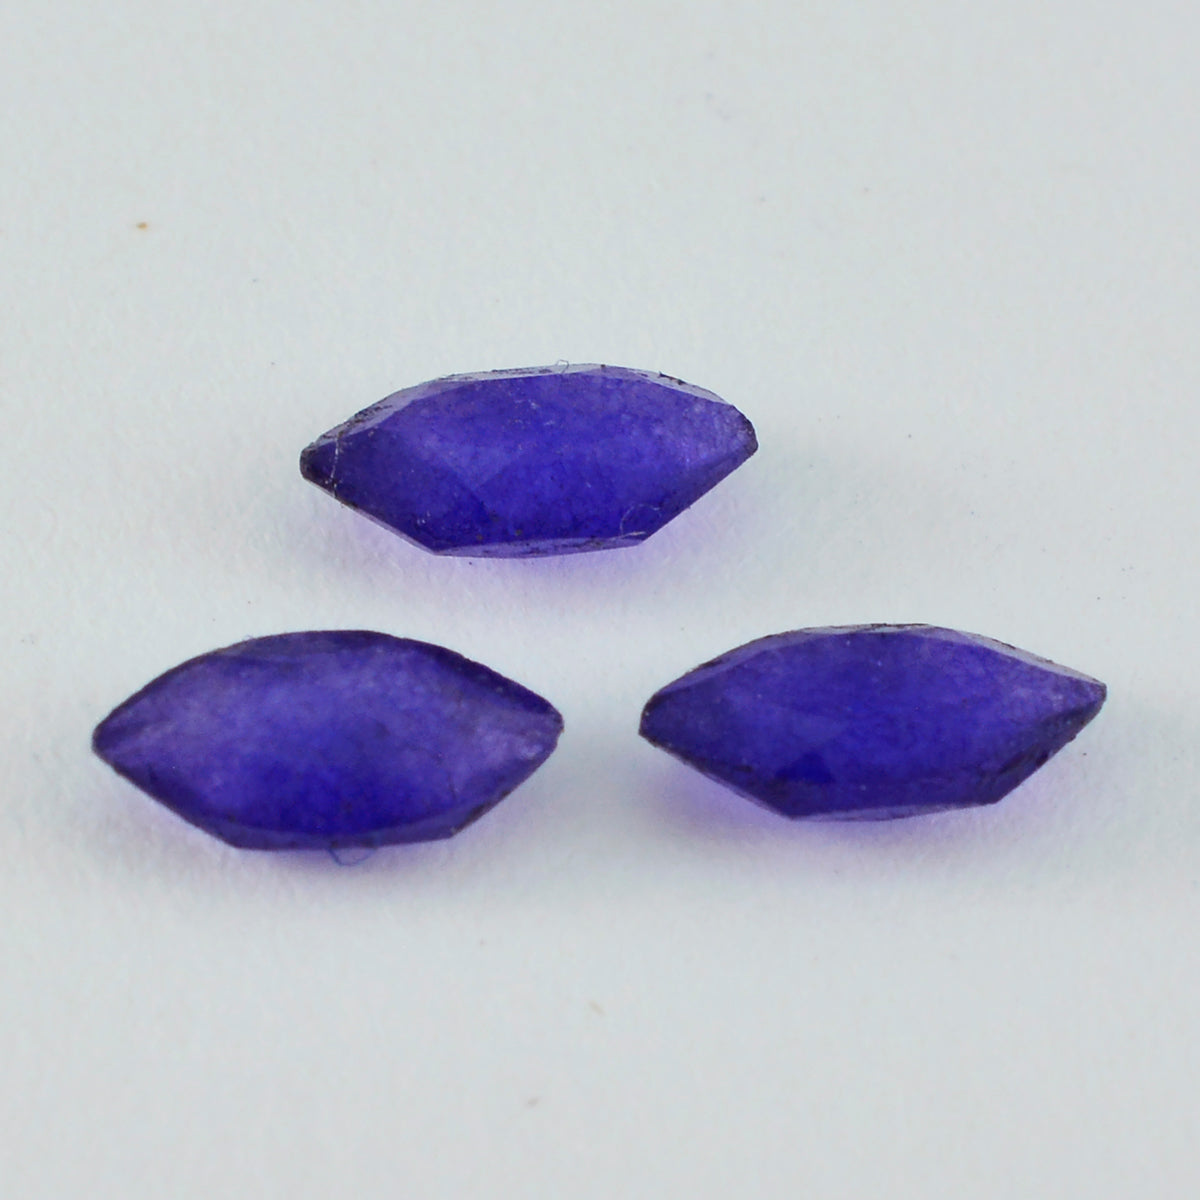 Riyogems 1PC Natural Blue Jasper Faceted 6x12 mm Marquise Shape AAA Quality Stone